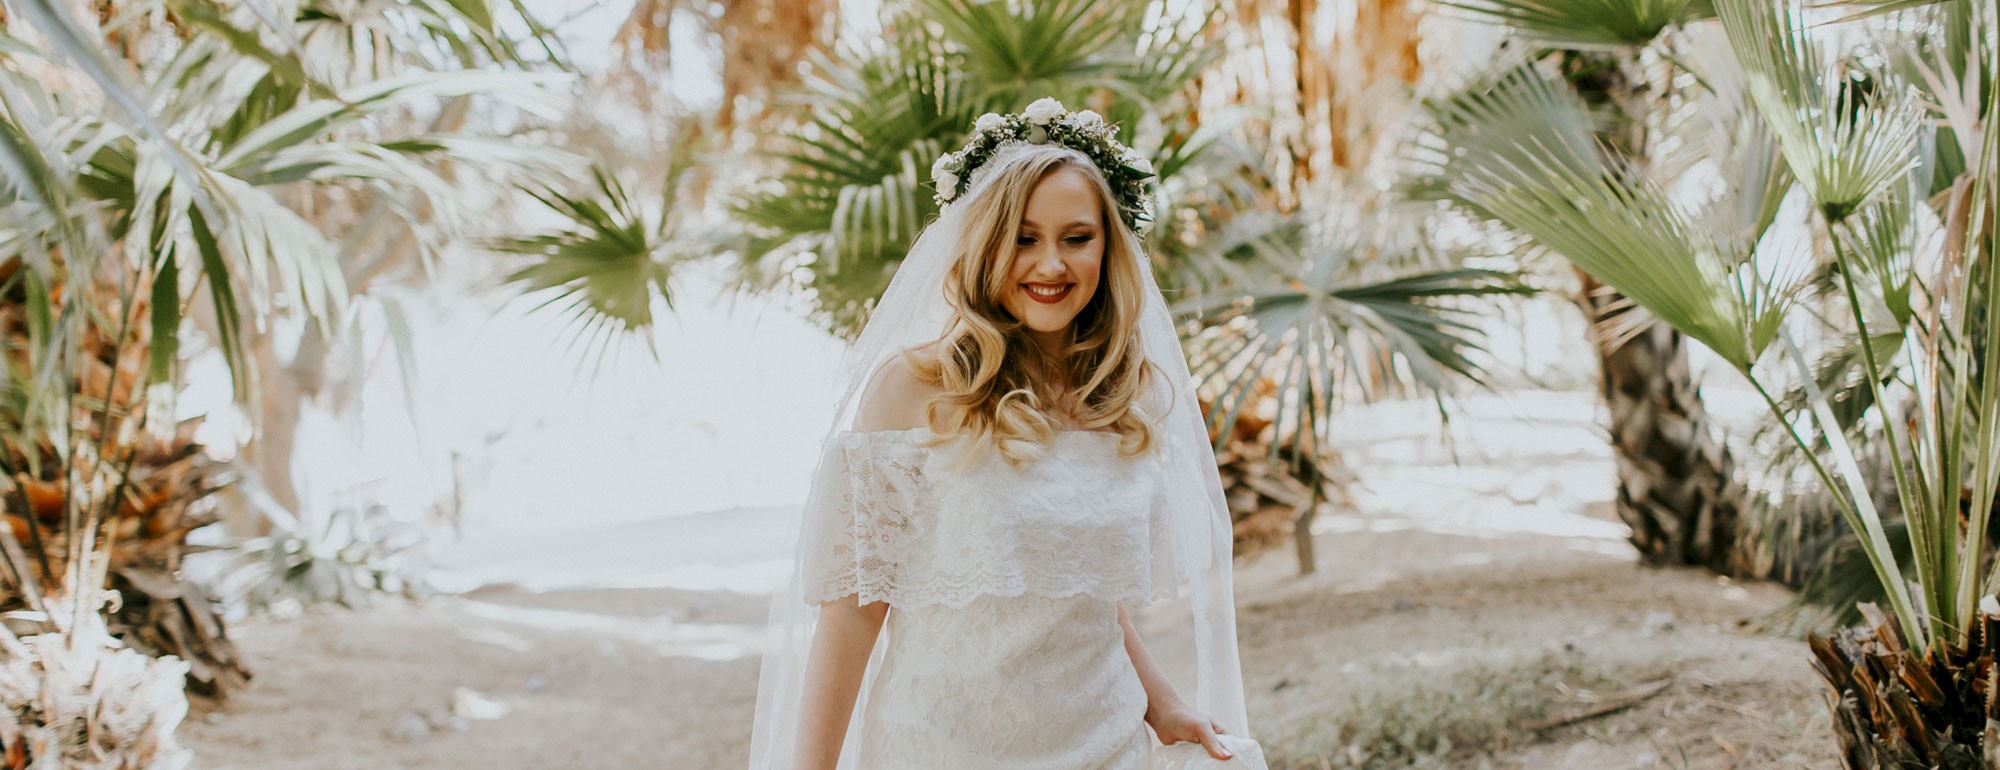 Wedding and Party Planning at The Living Desert Zoo and Gardens